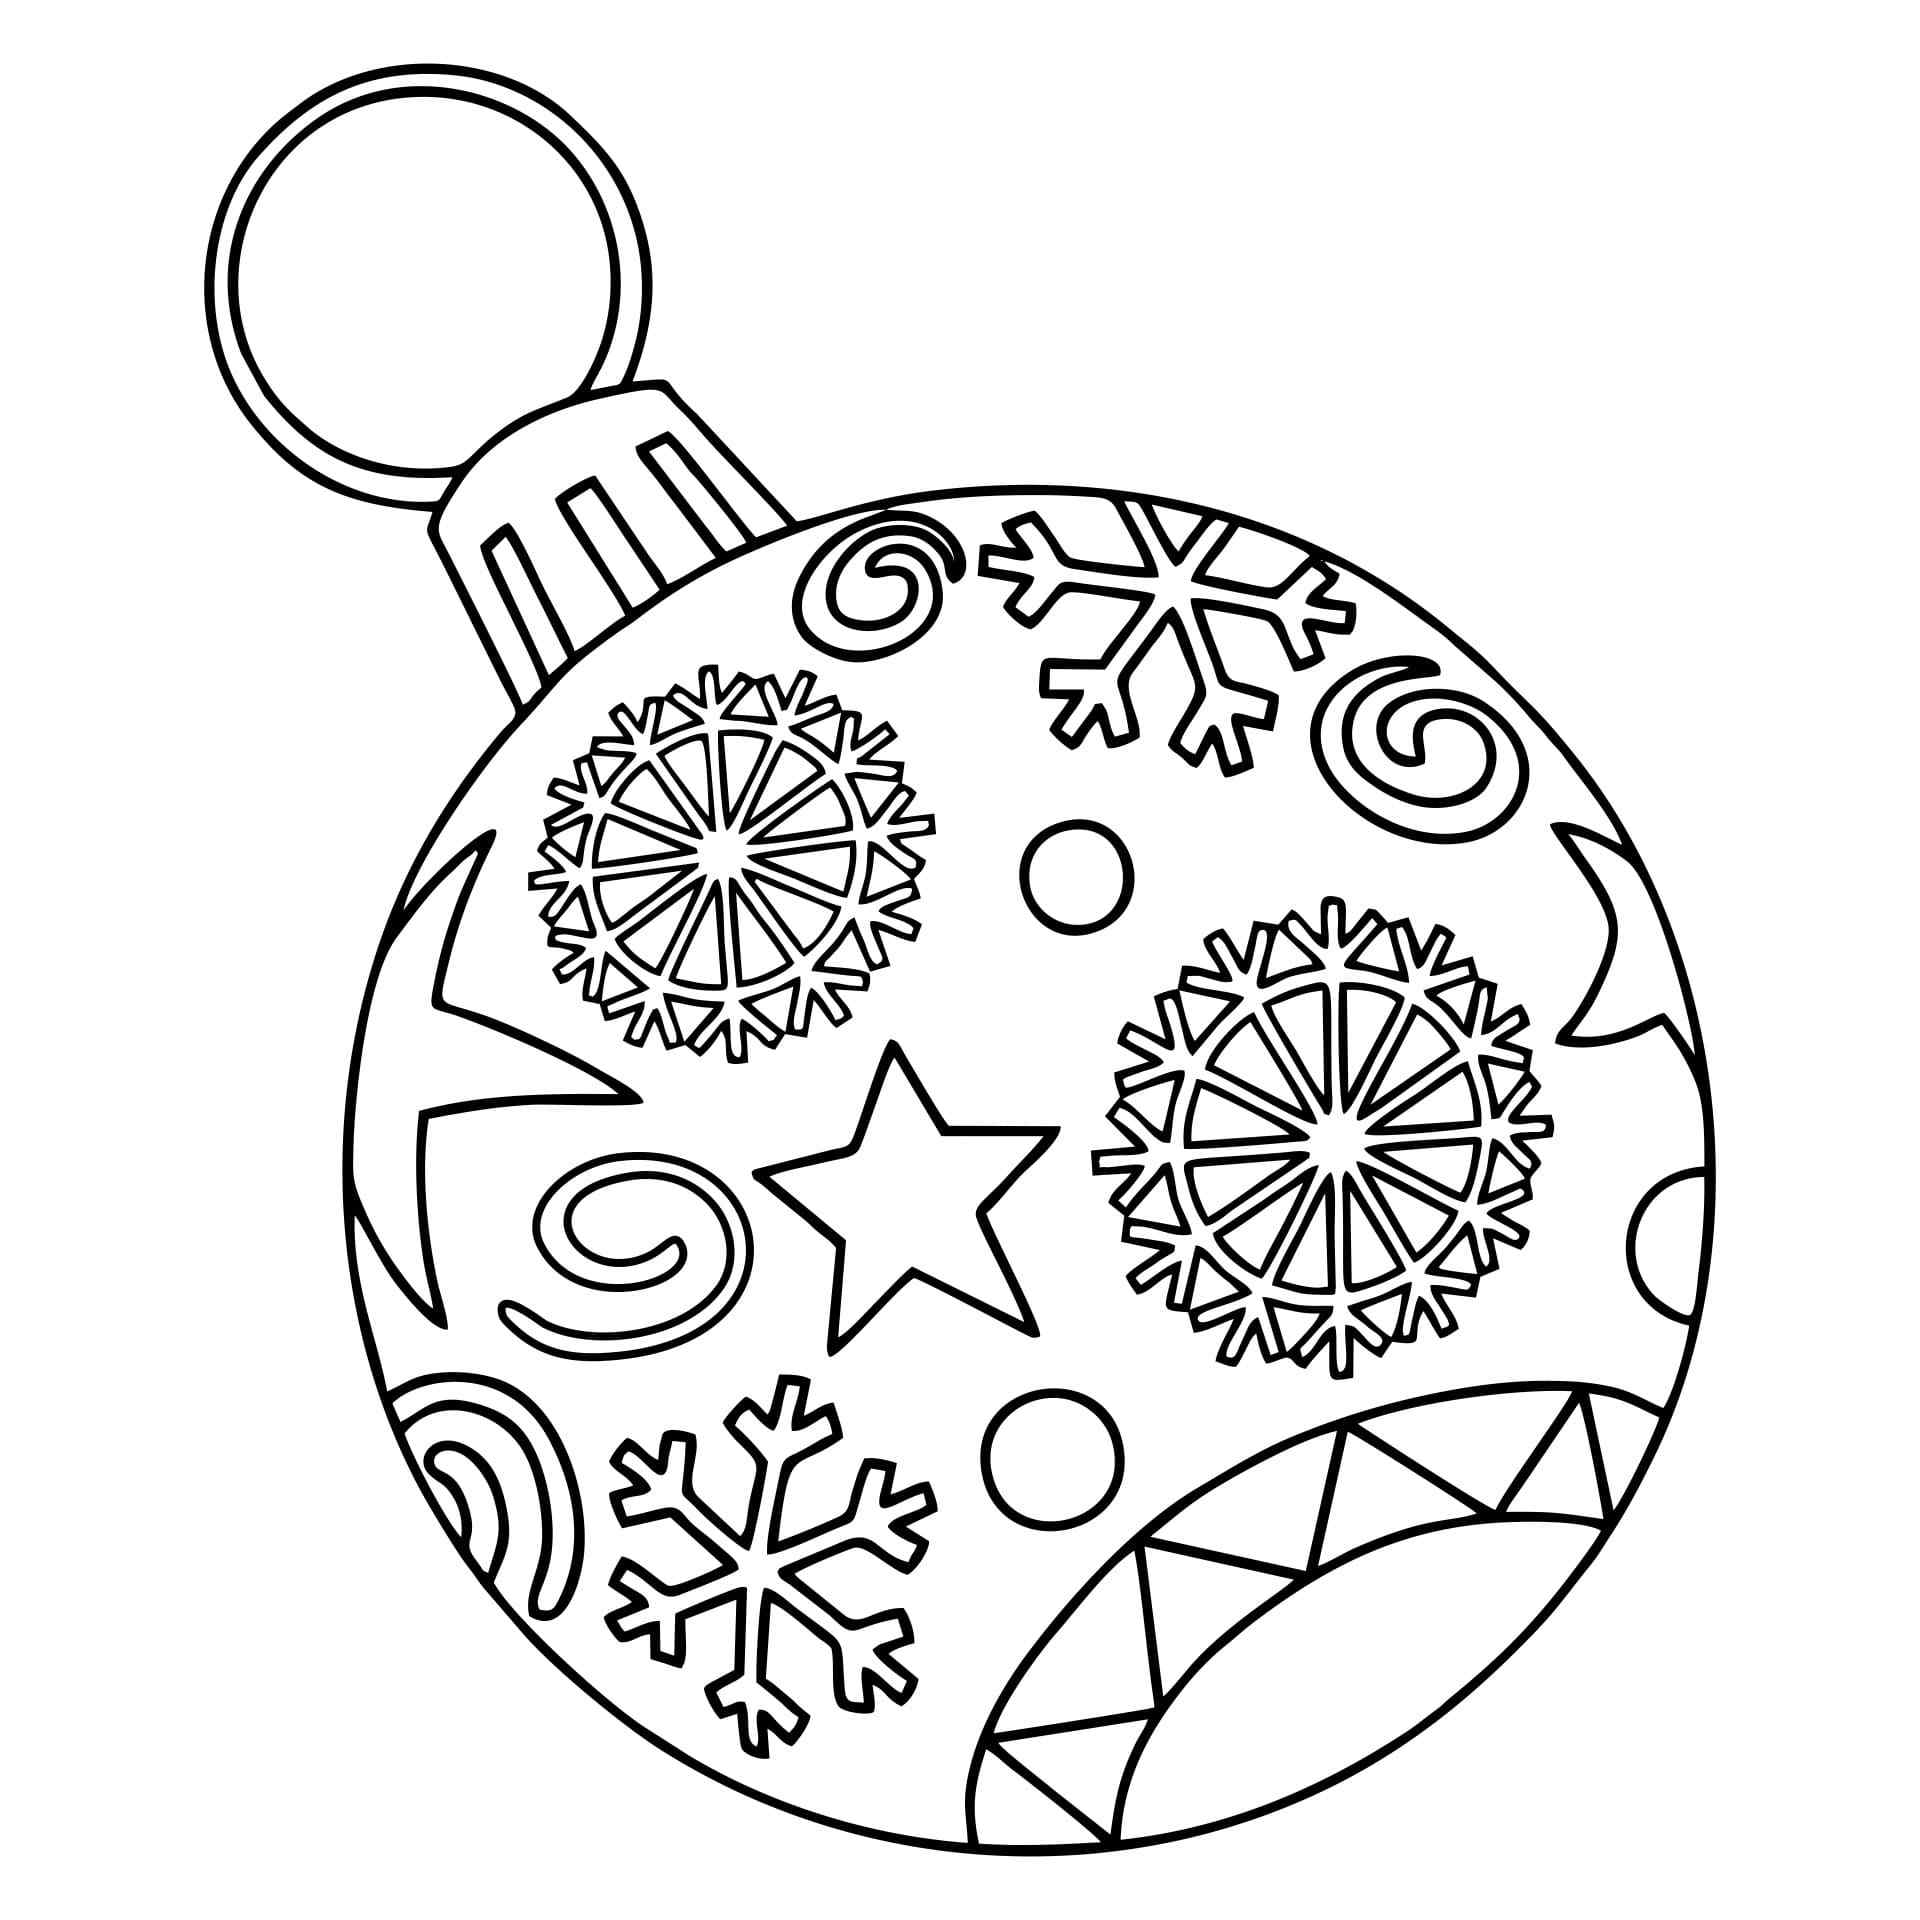 Decorated With Snowflakes And Stars Coloring Page